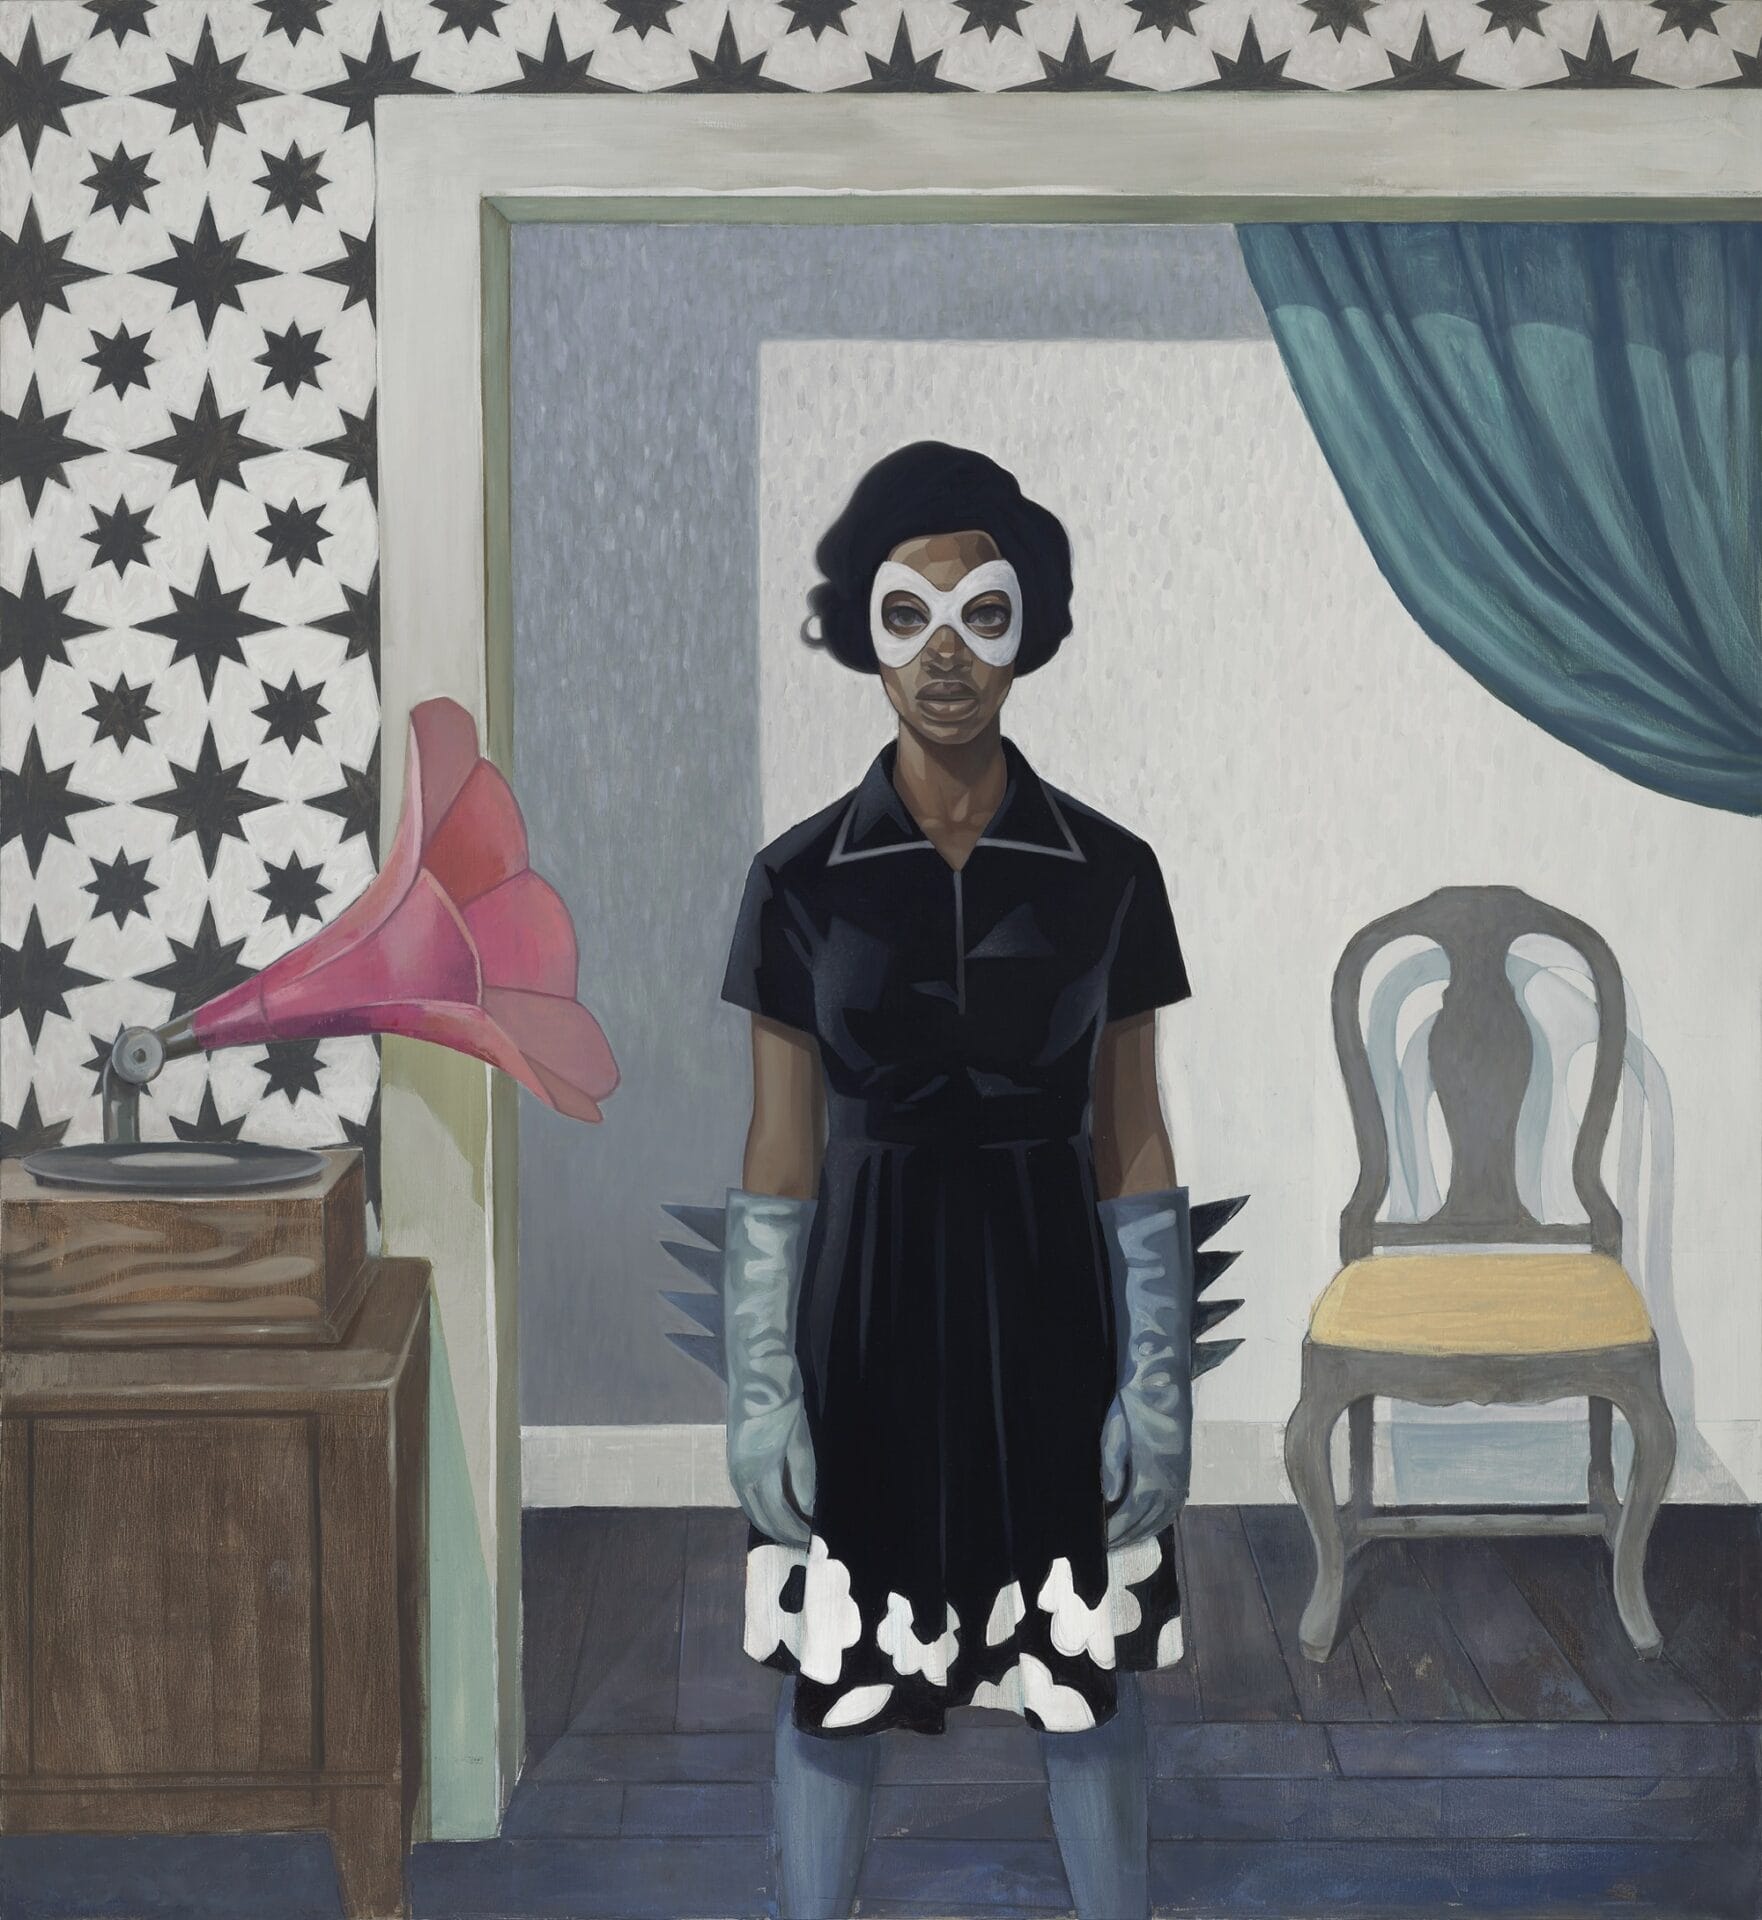 an oil painting of an imagined young black woman wearing a black and white dress, gloves, and an eye mask, standing in a room with patterned wallpaper, a pink gramophone, and a chair